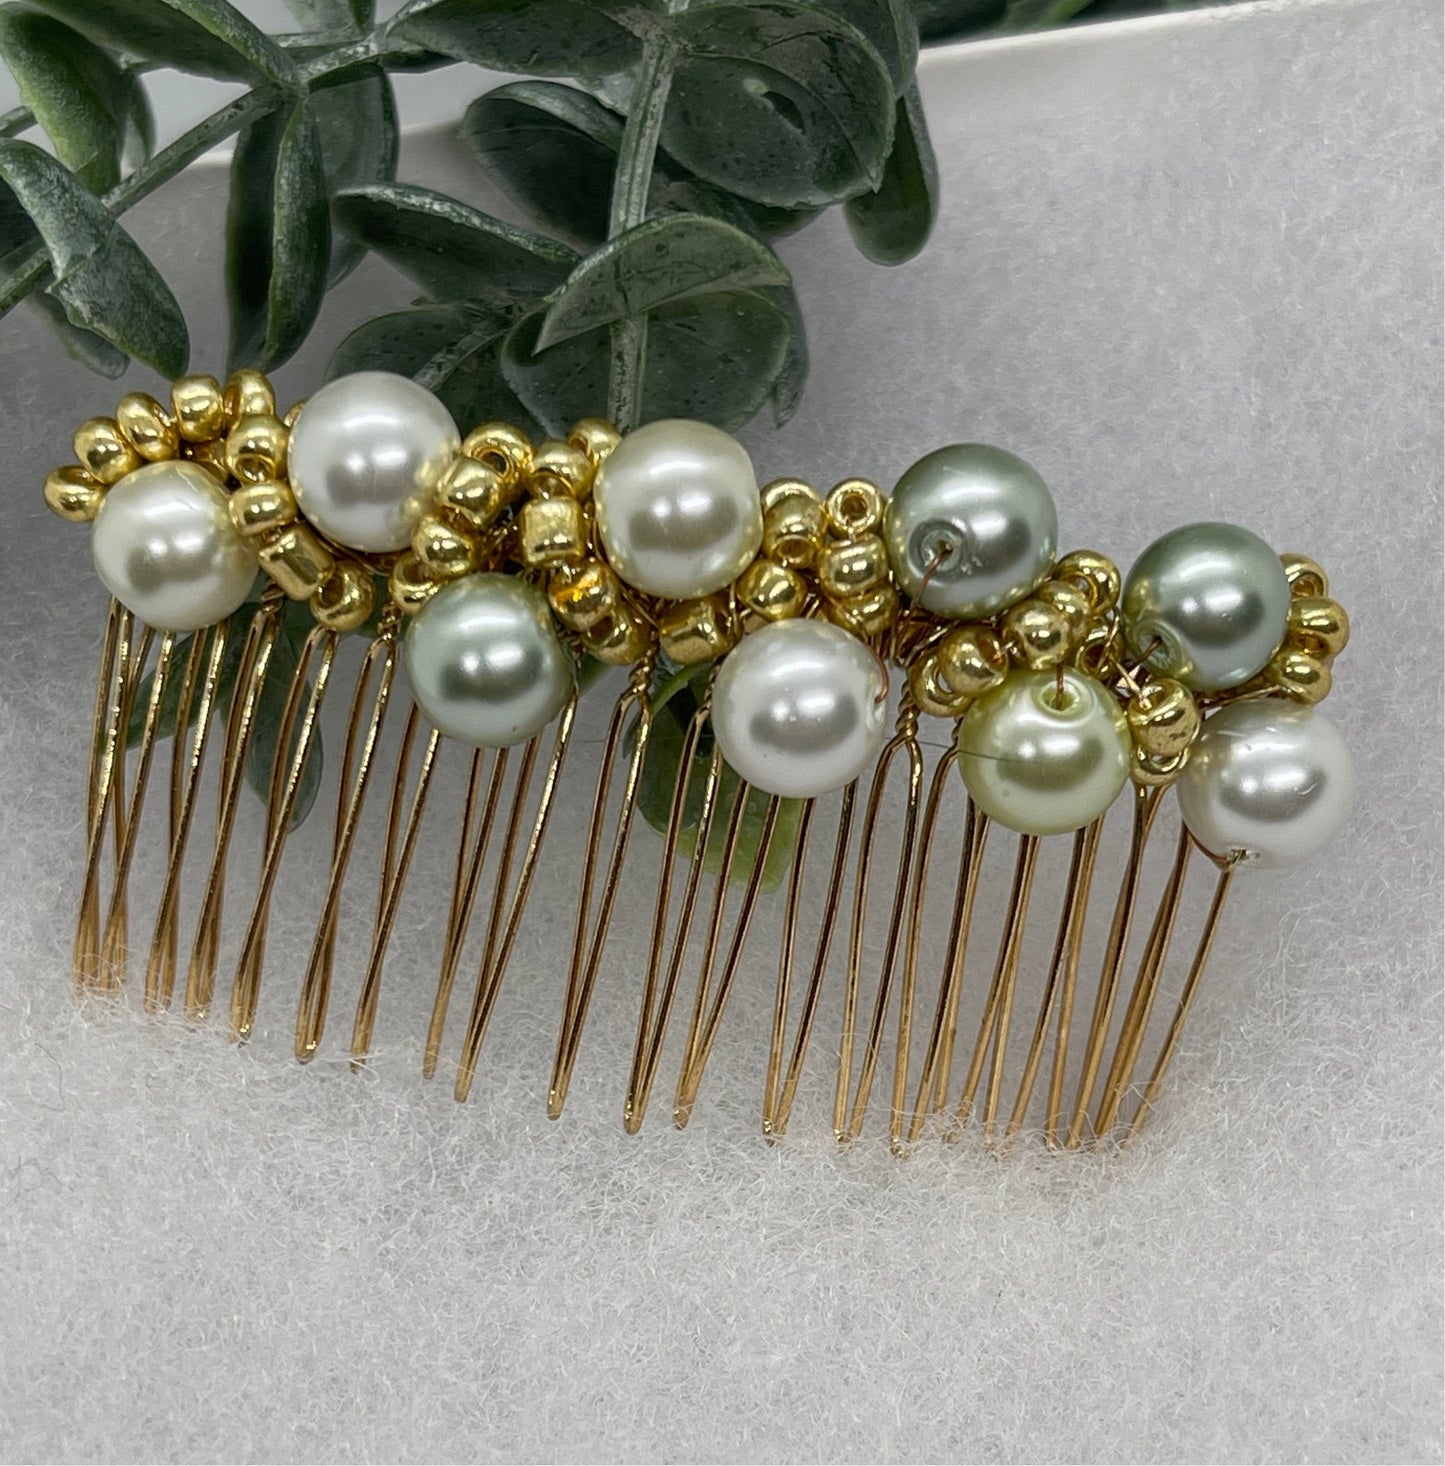 Neutral tone  gold beaded side Comb 3.5” gold Metal hair Accessories bridesmaid birthday princess wedding gift handmade accessories